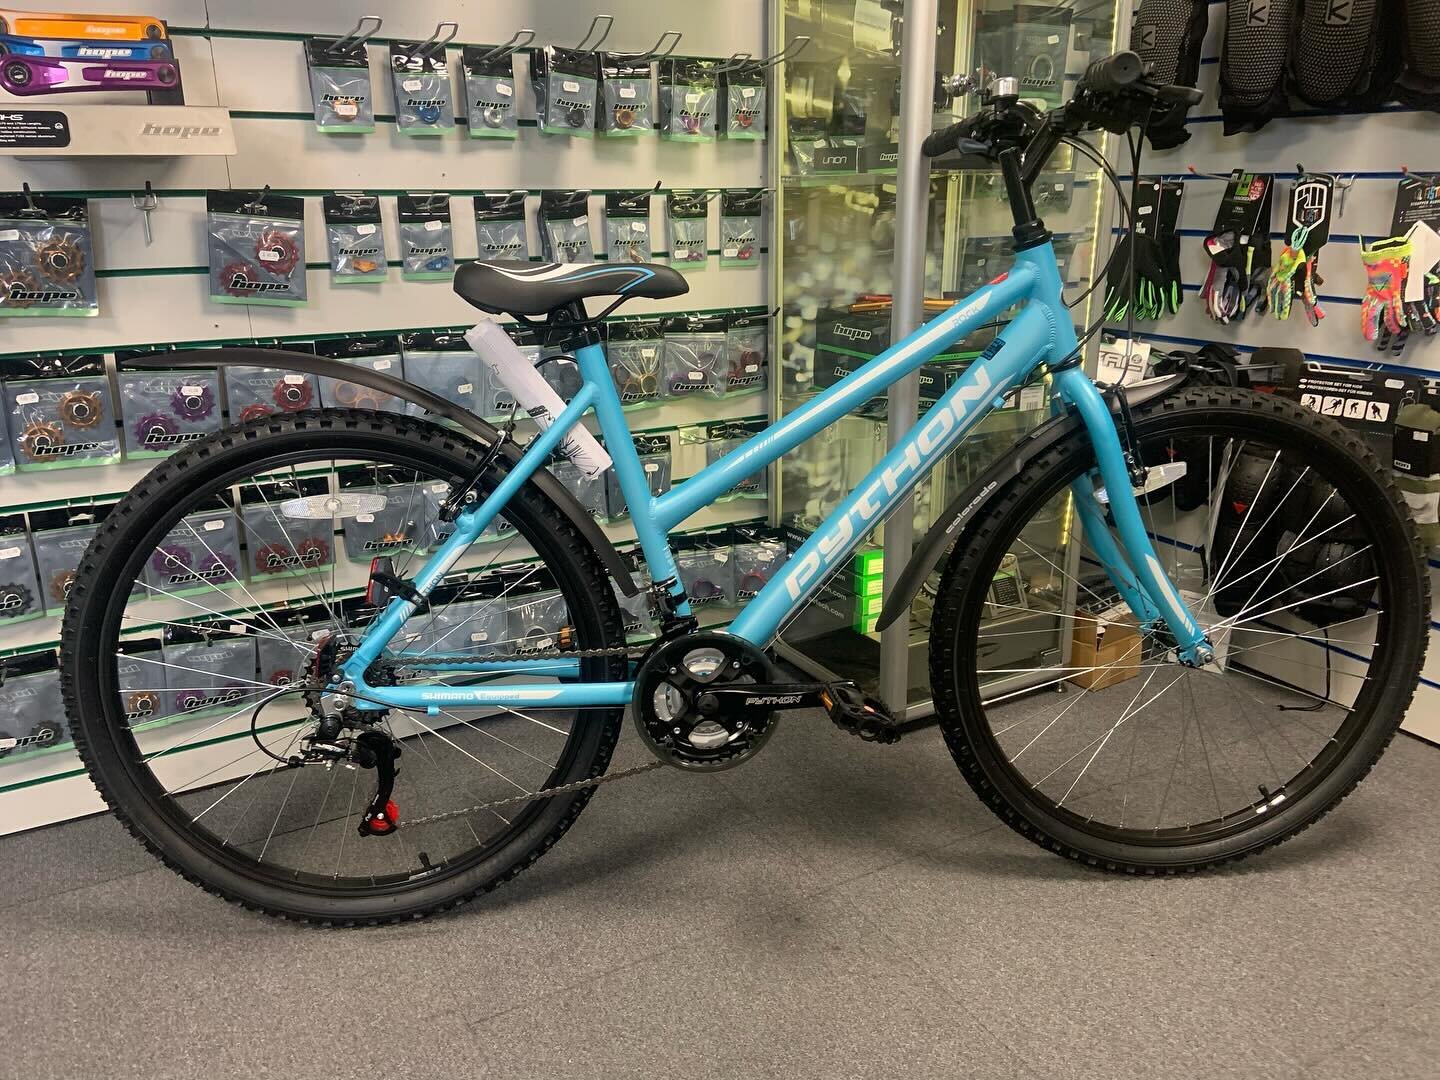 Another of our main selling leisure bikes leaving us today. @pythonbikes_uk #rock all ready for its new owner, equipped with clip on mudguards. Available in different frame sizes and frame styles, a great bike for a the leisure cyclist to get out and